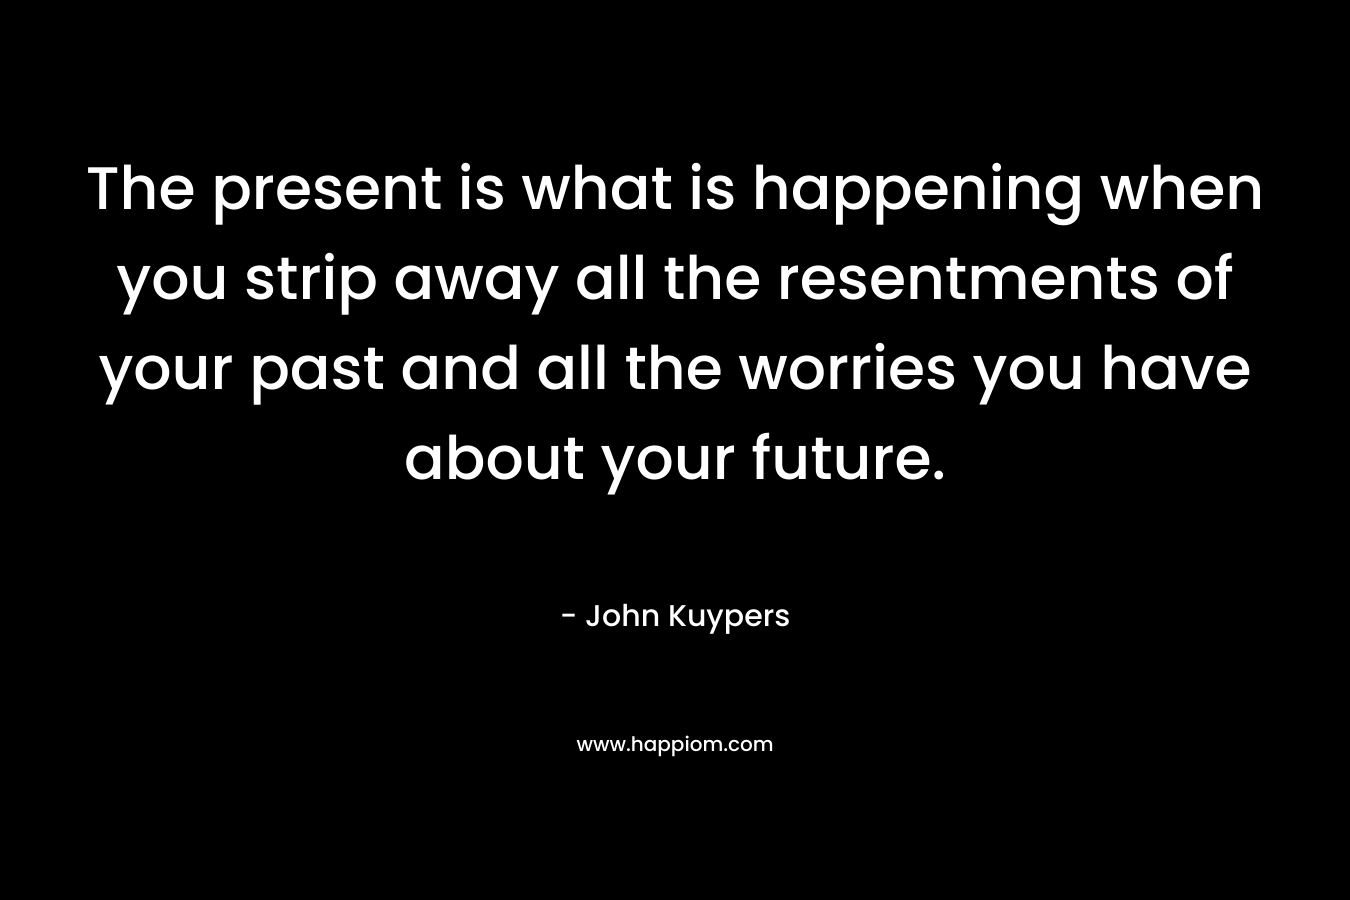 The present is what is happening when you strip away all the resentments of your past and all the worries you have about your future.